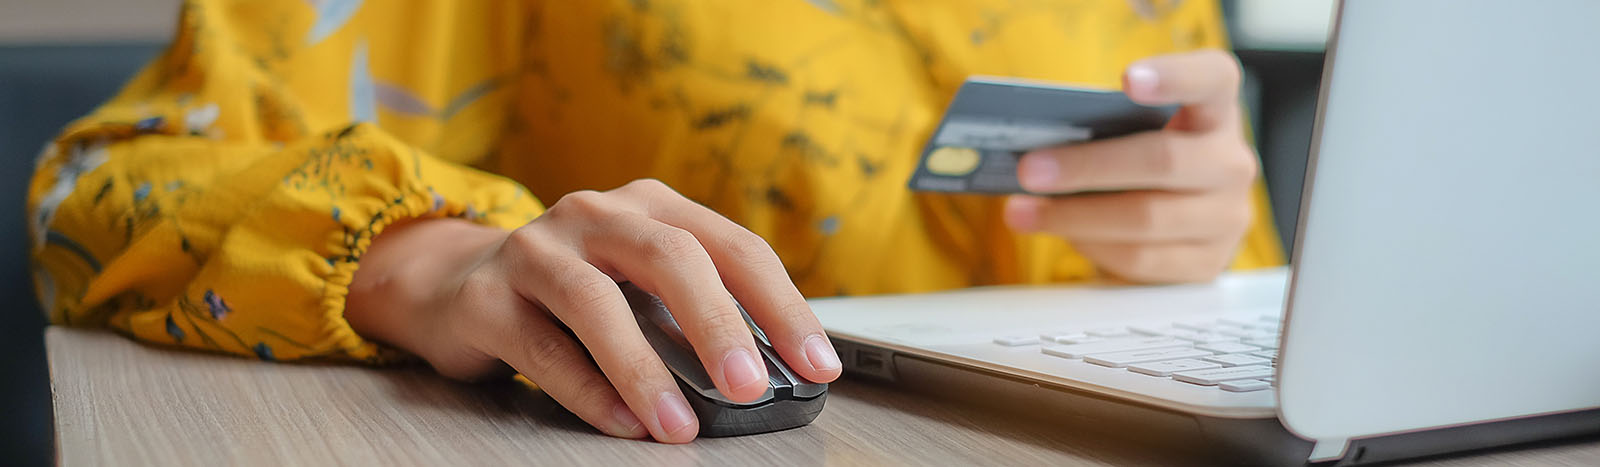 Woman using credit card to shop online